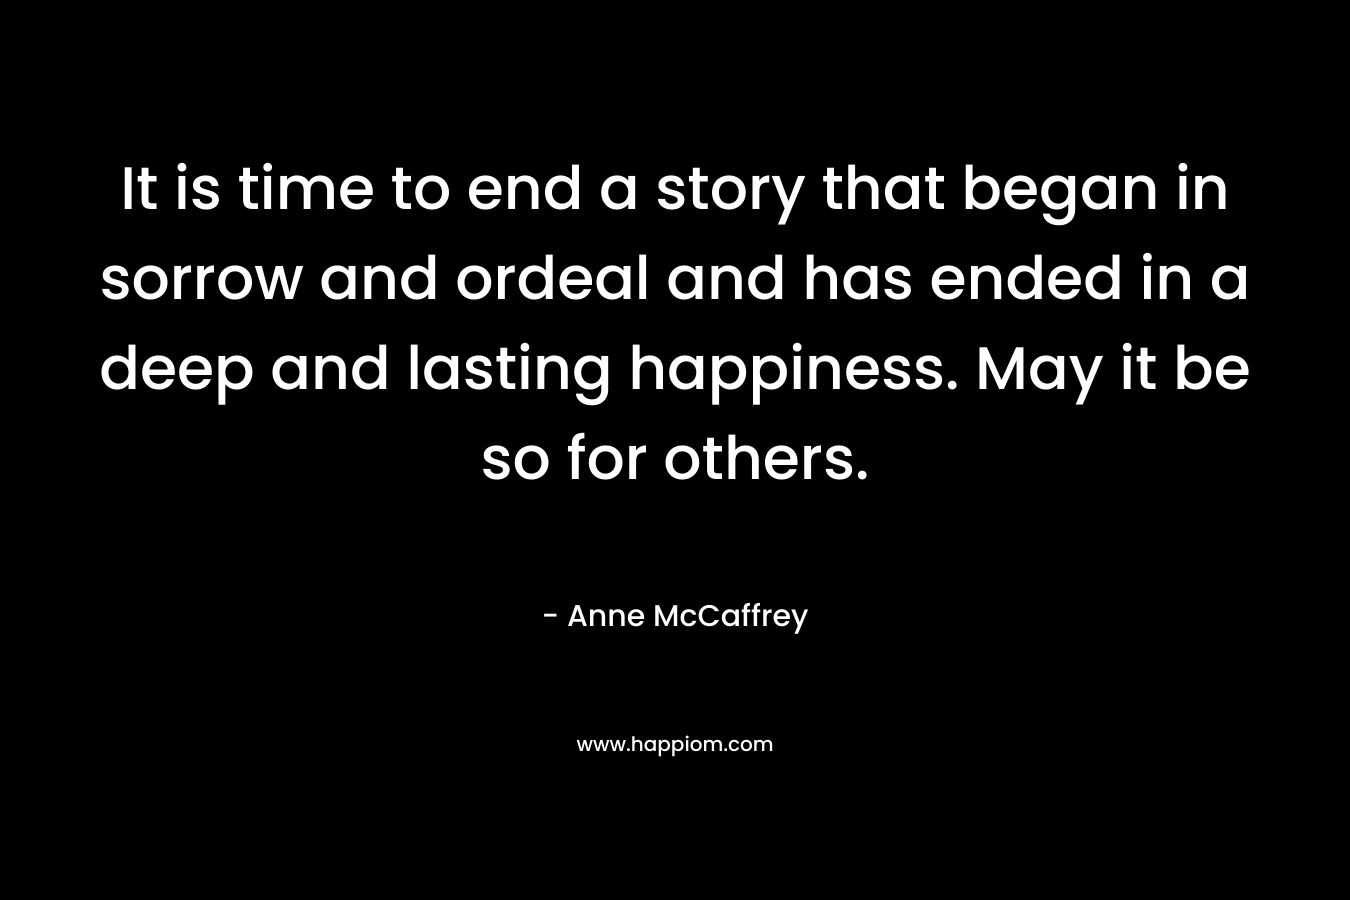 It is time to end a story that began in sorrow and ordeal and has ended in a deep and lasting happiness. May it be so for others.